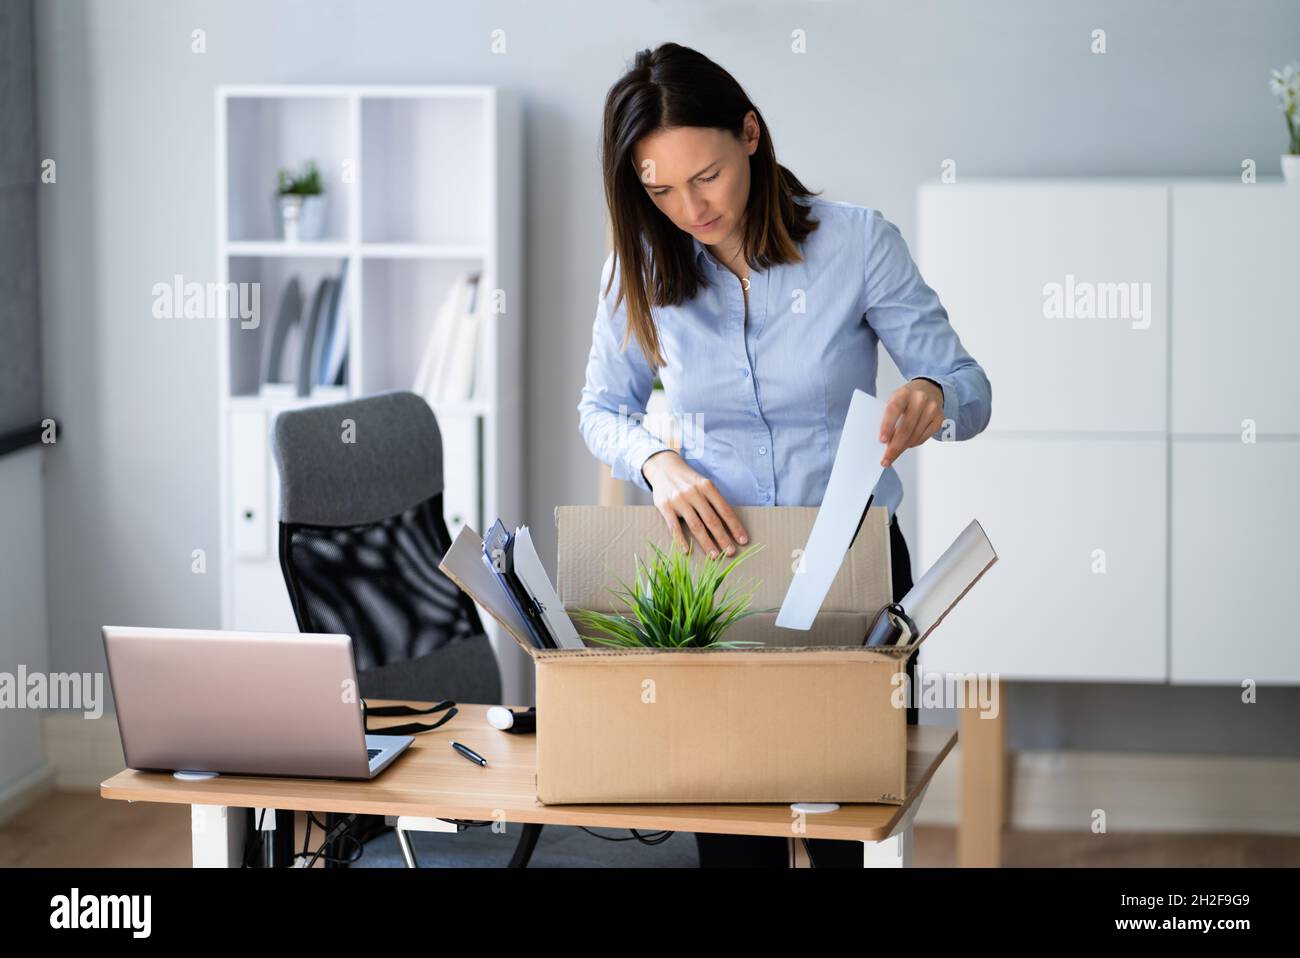 Resign From Job Or Fired Employee Moving Out Of Office Stock Photo